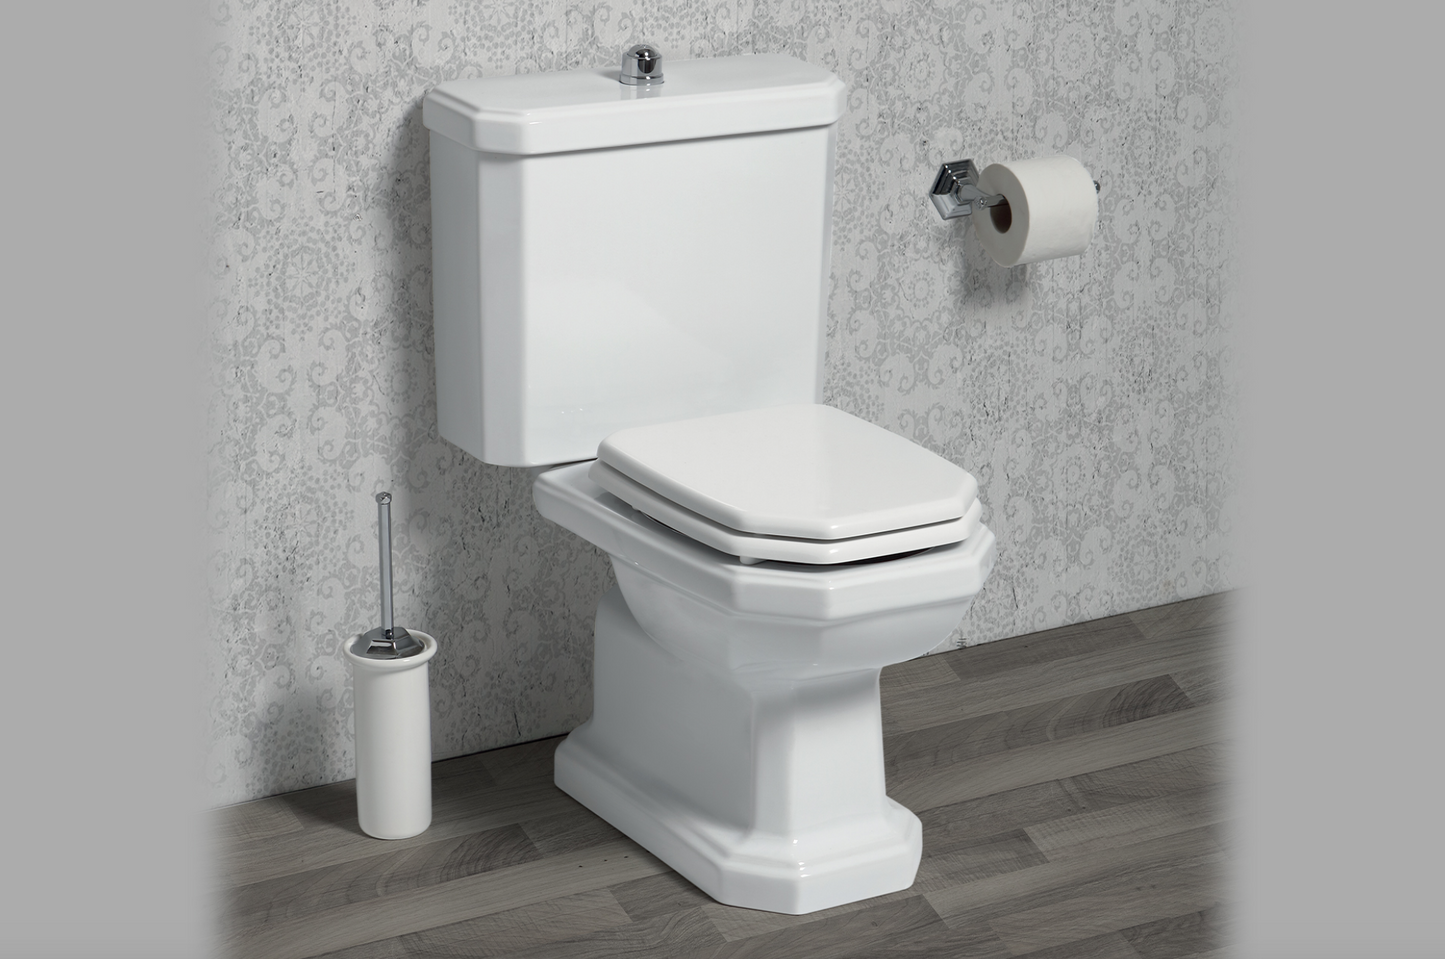 Floor-standing ceramic toilet with Provence 700 monobloc cistern by Balneo Toscia Classic style